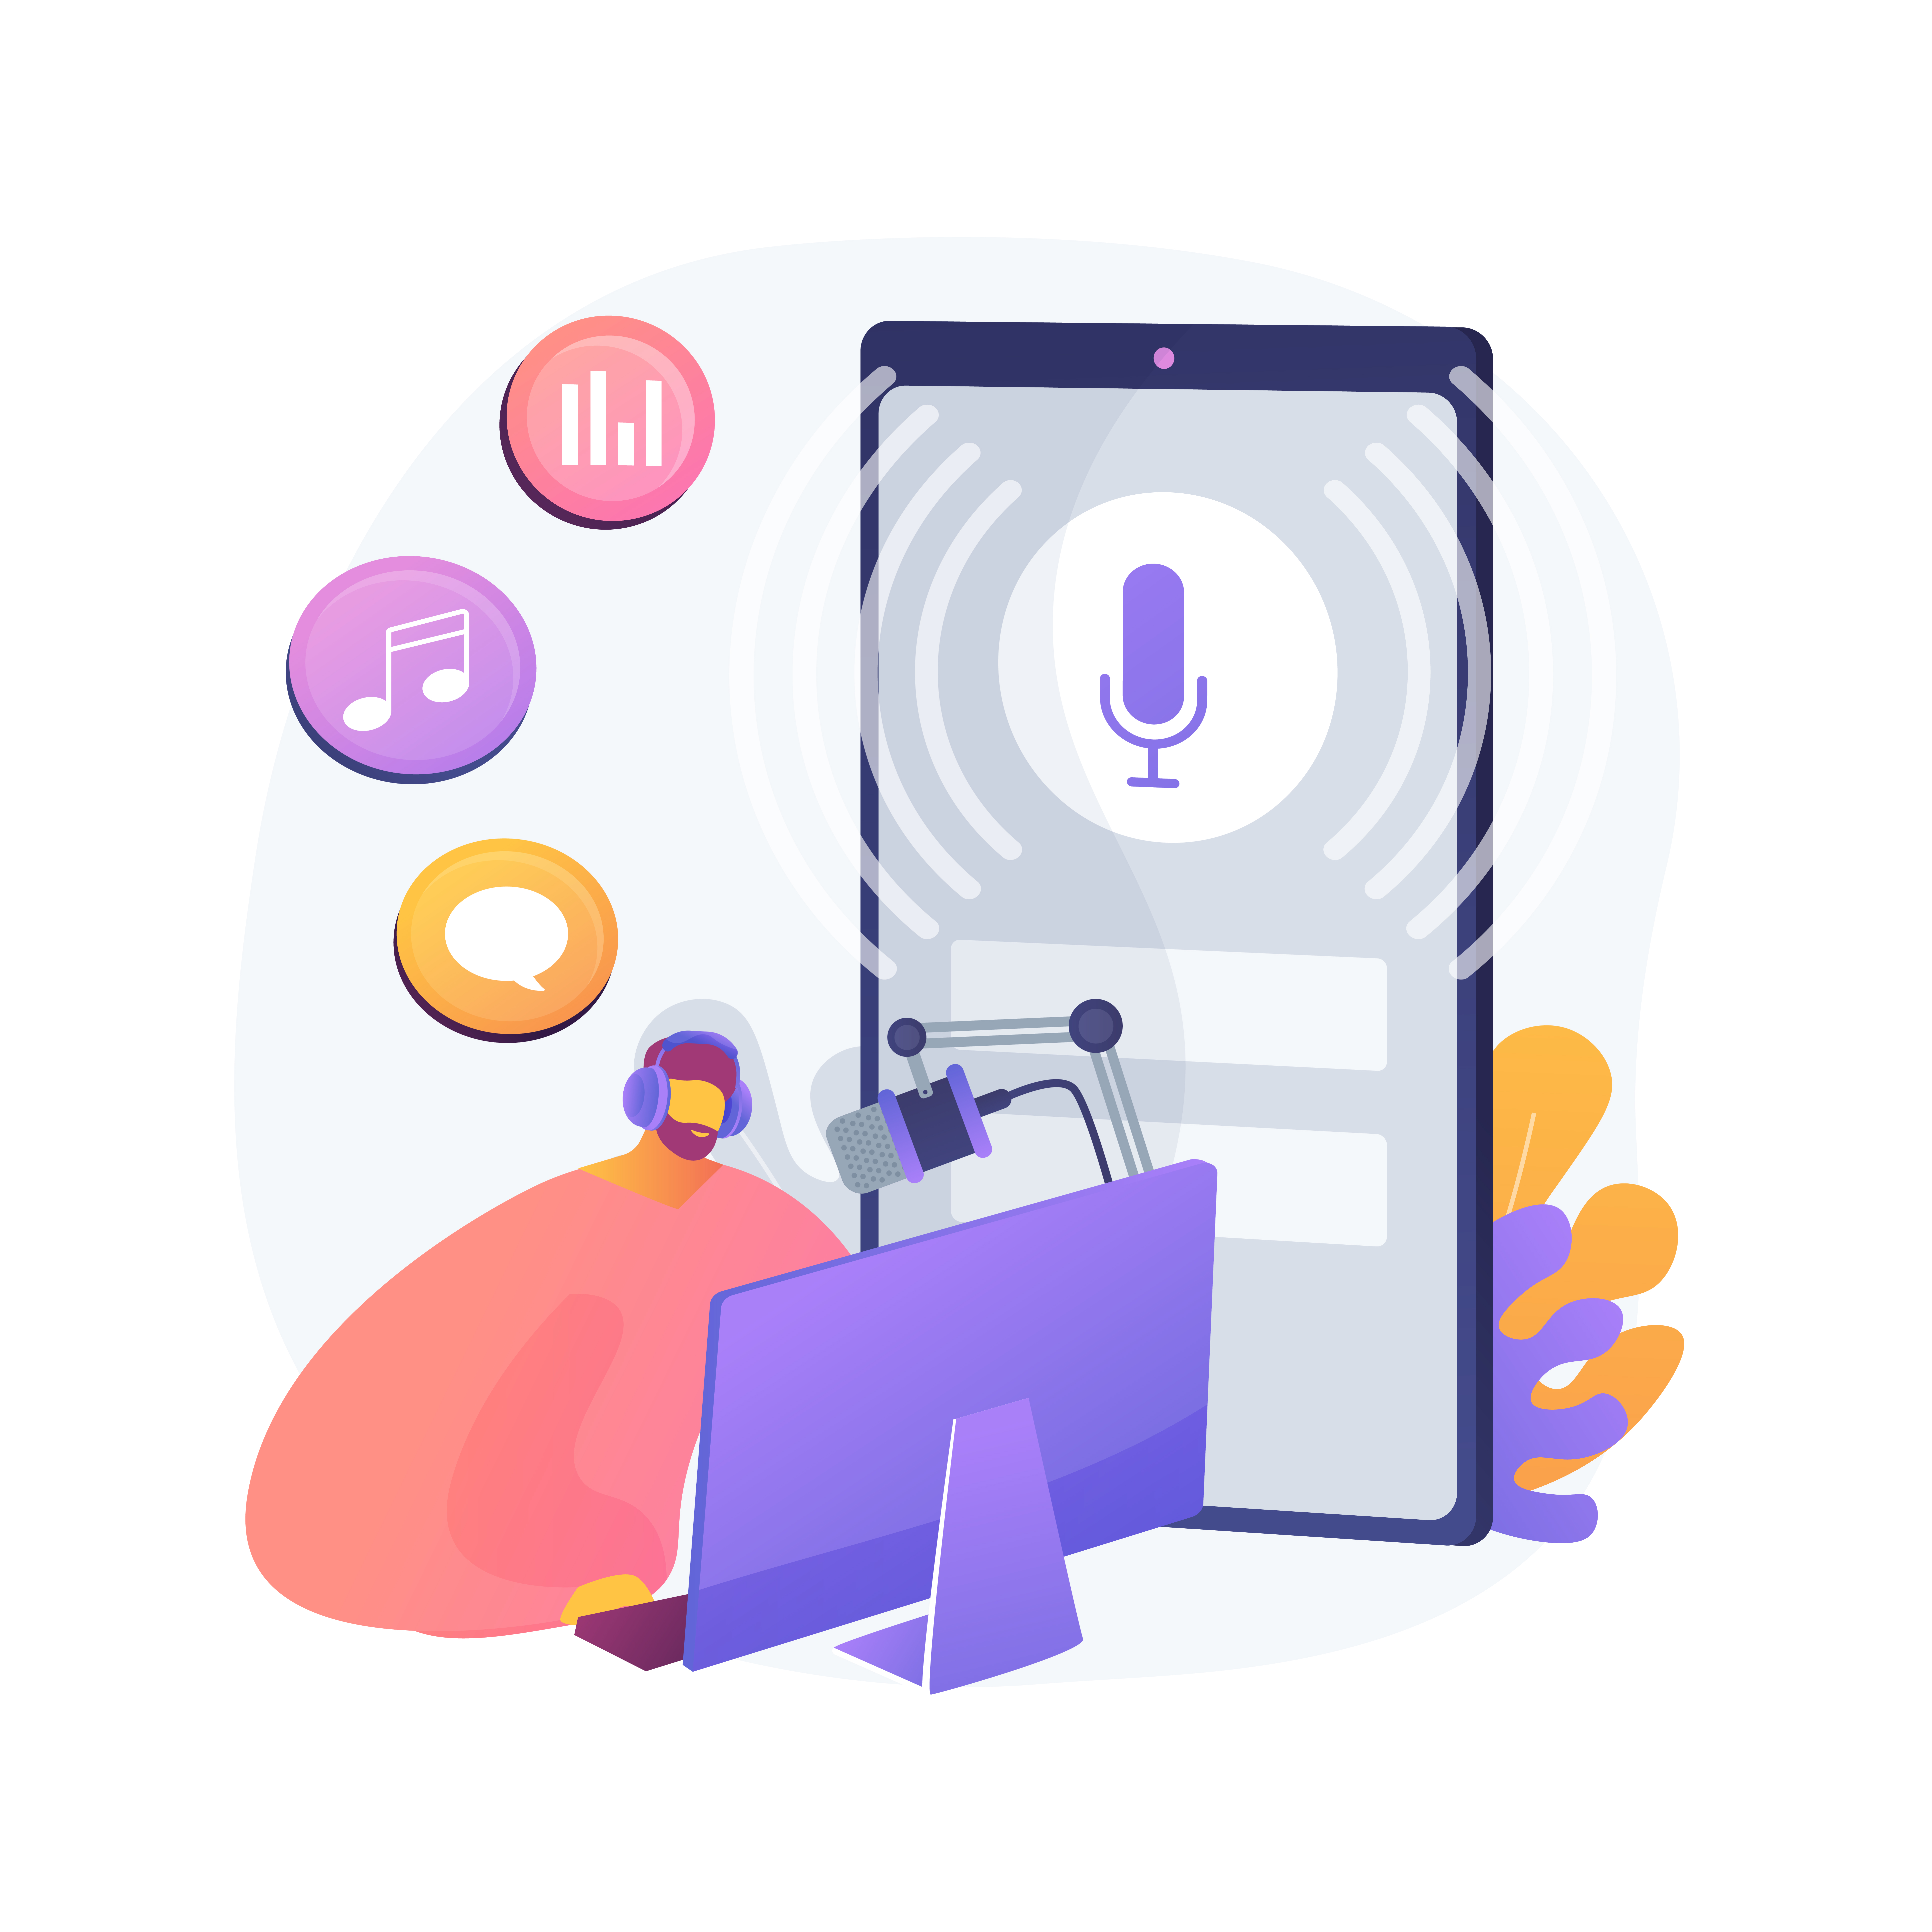 What is the Impact of voice search on SEO?